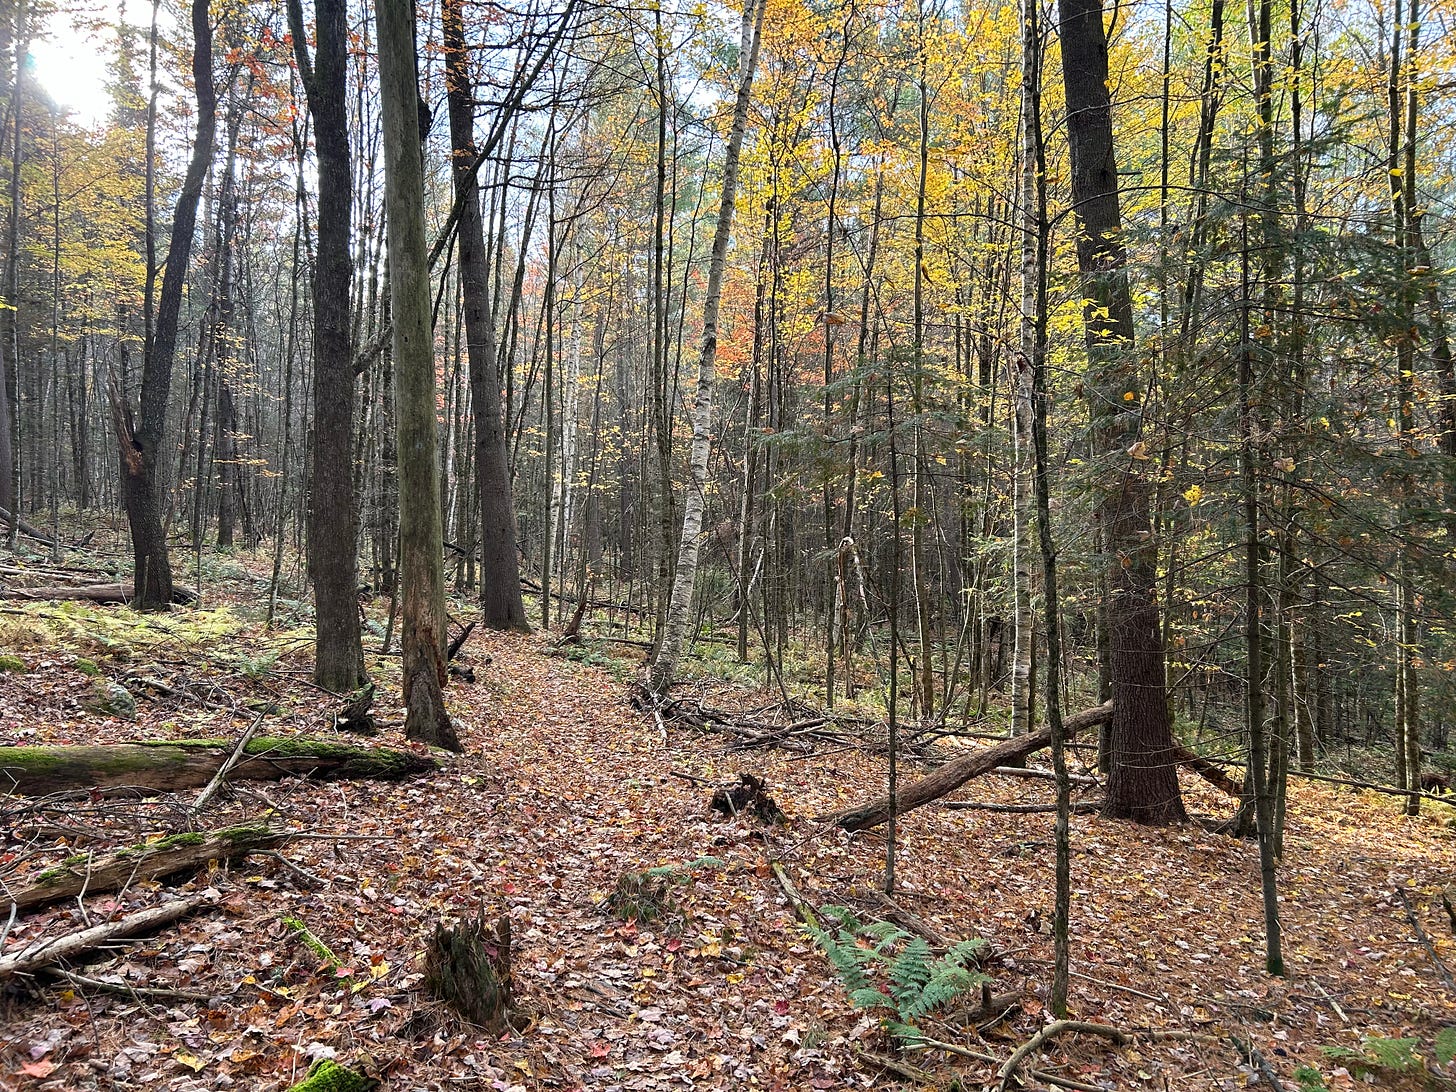 A New England forest in late fall: birch and pine trees, some yellow leave still on trees, but mostly brown fallen leaves carpeting the forest floor. 